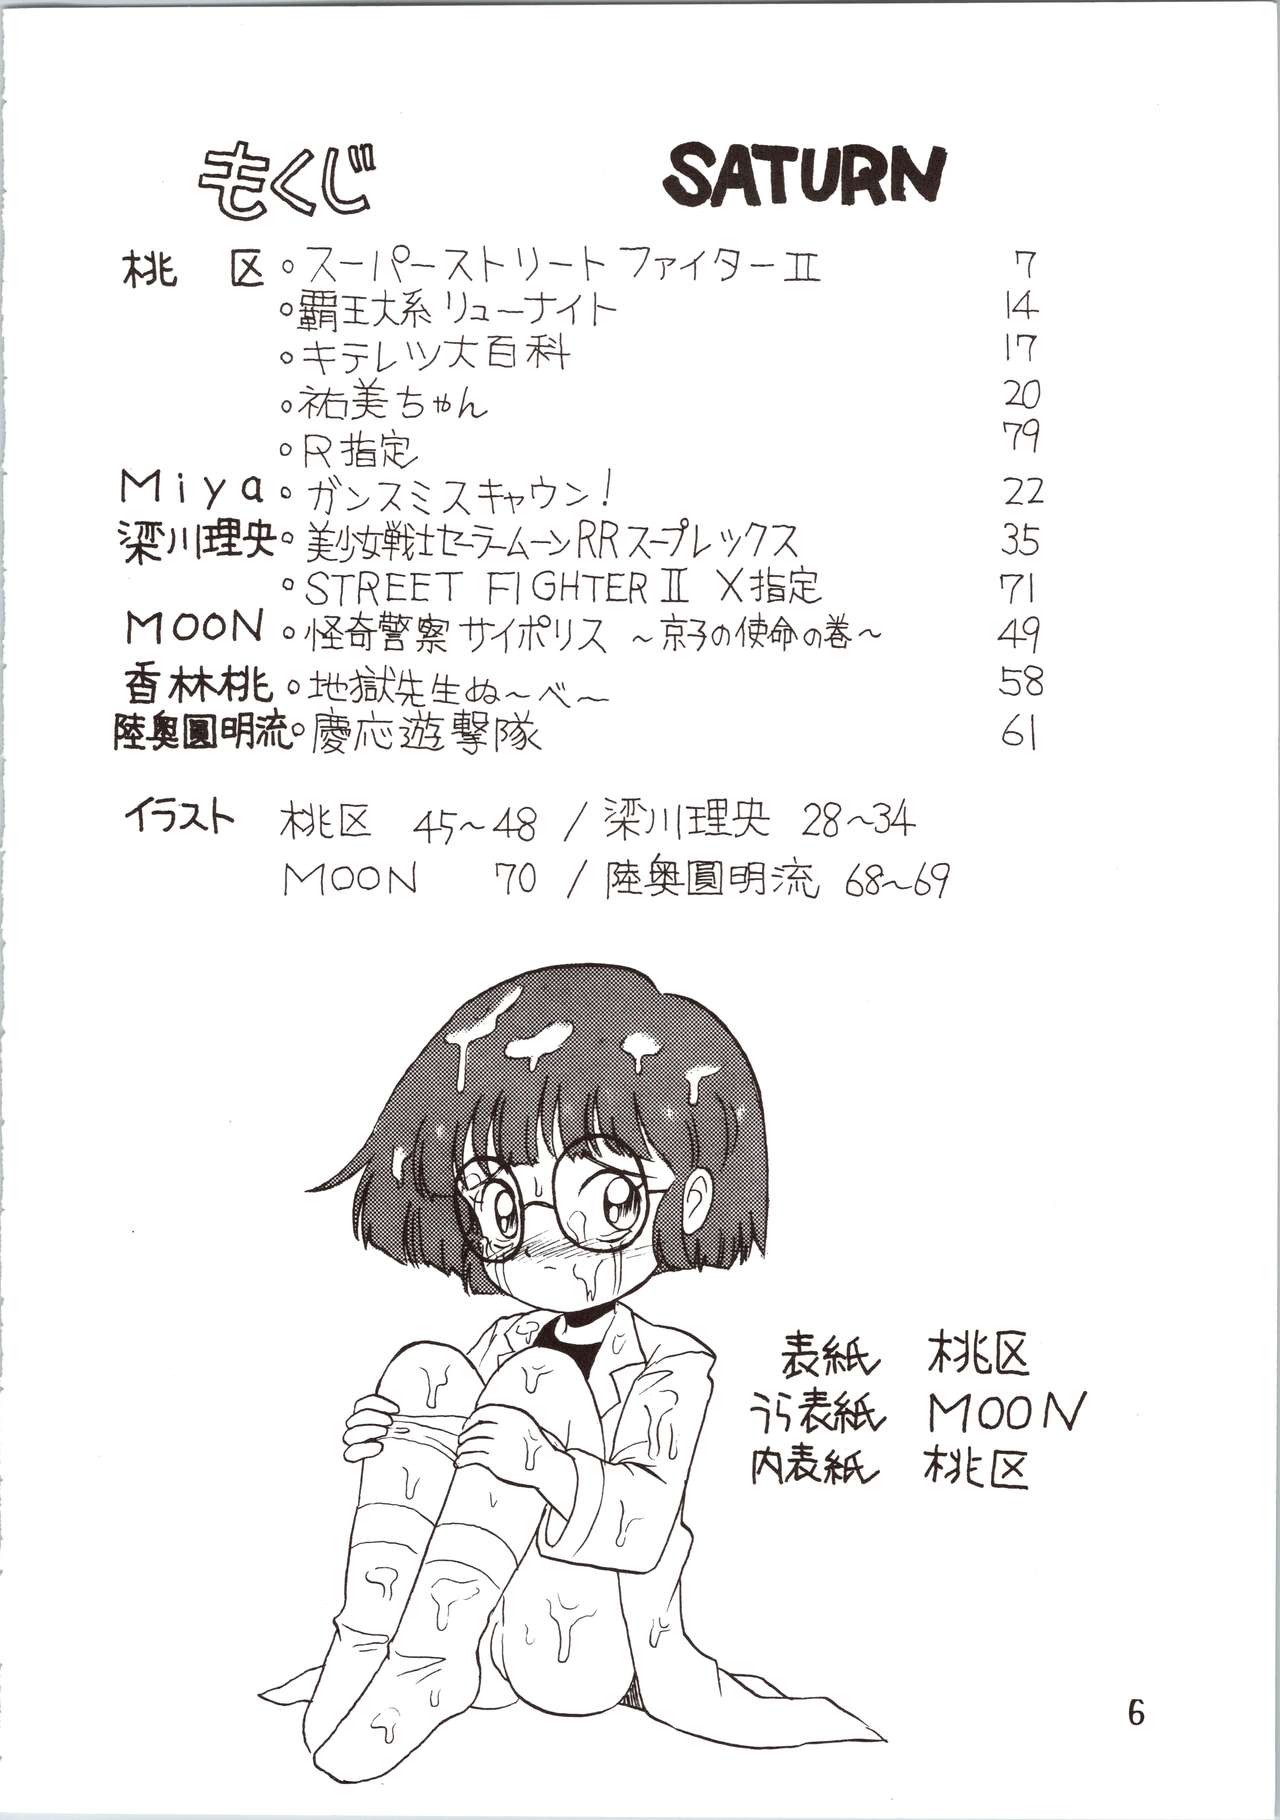 [The Commercial (Various)] SATURN (Various) page 6 full